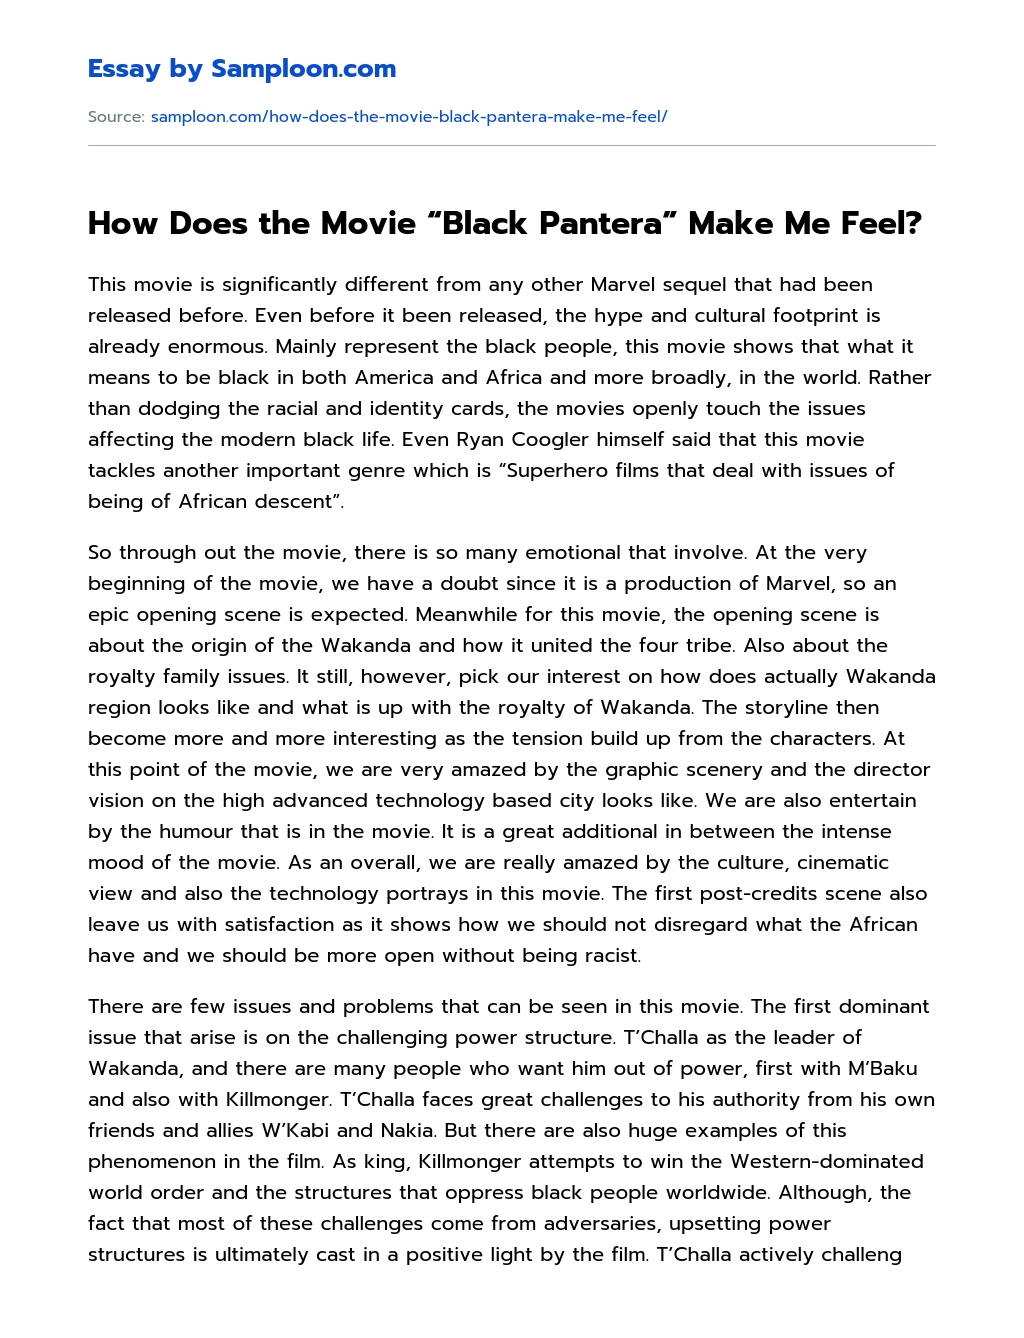 How Does the Movie “Black Pantera” Make Me Feel? Review essay